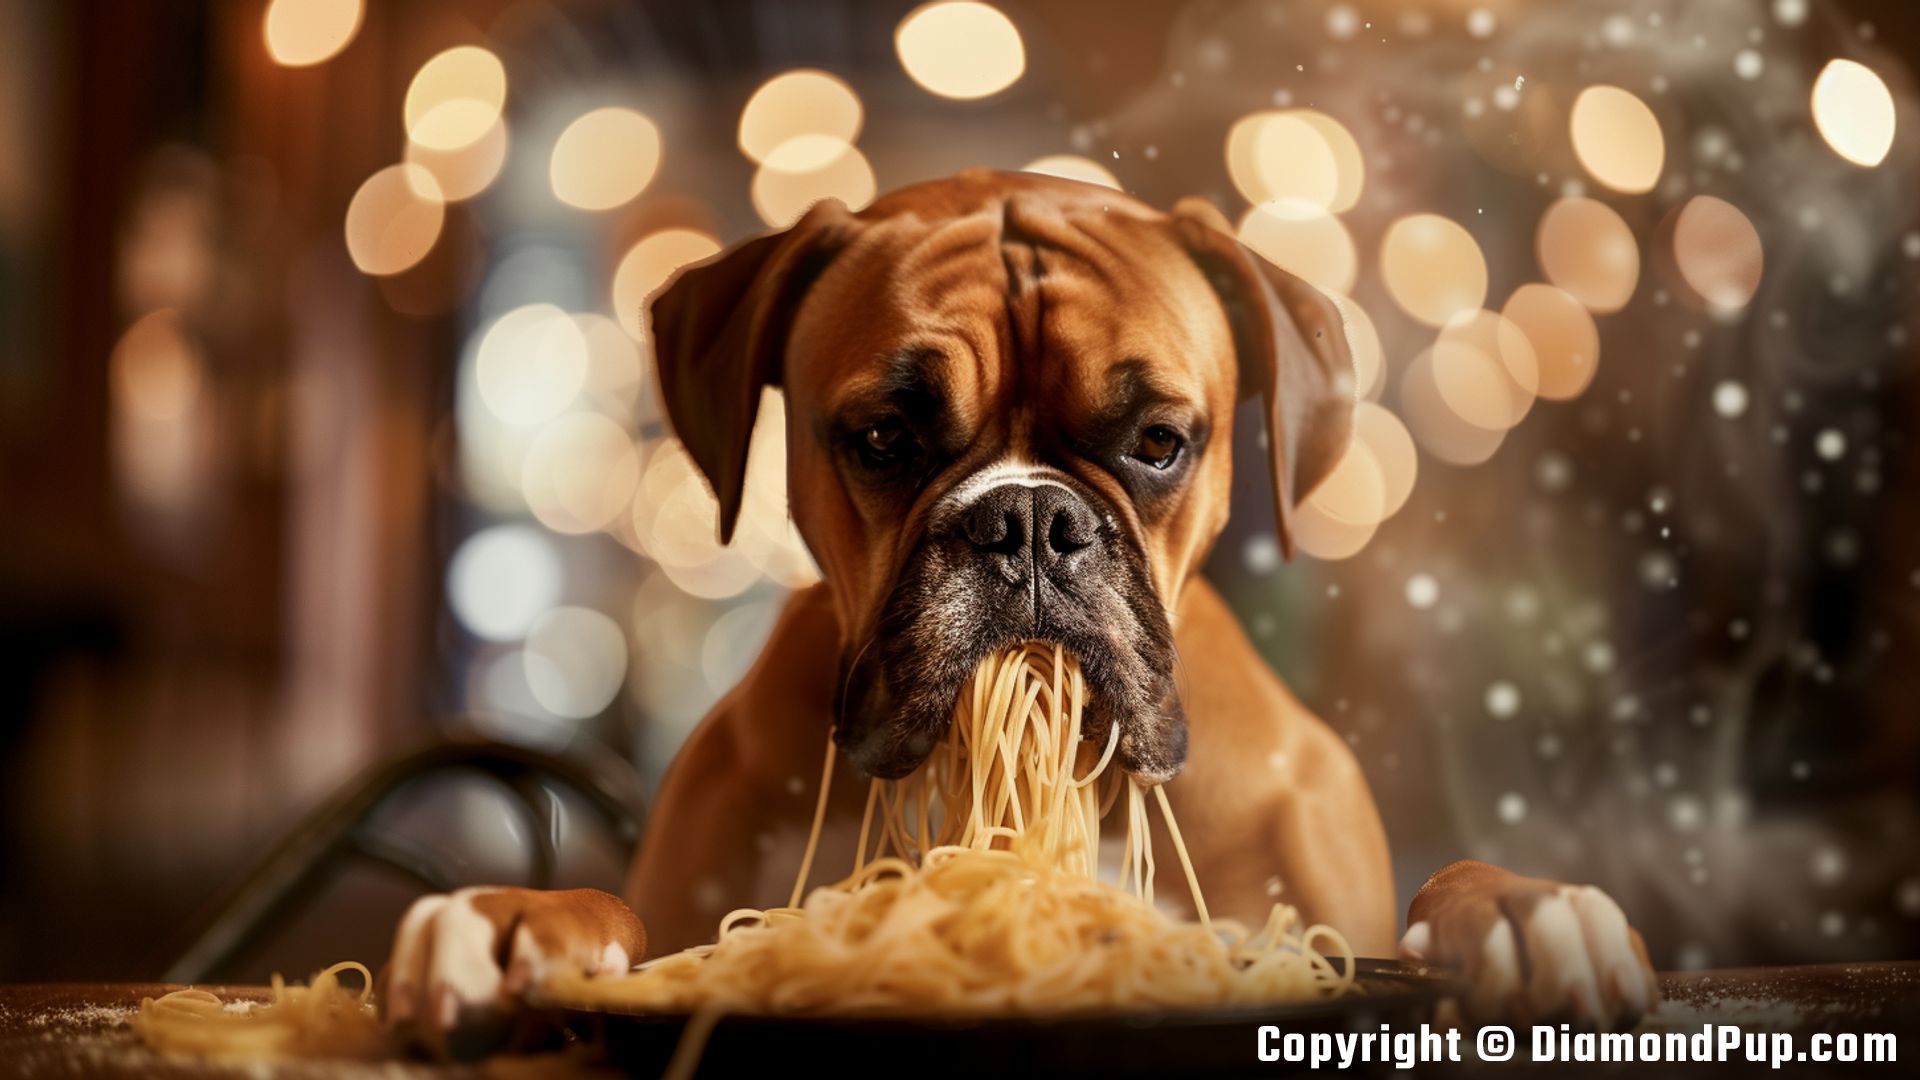 Image of a Playful Boxer Snacking on Pasta